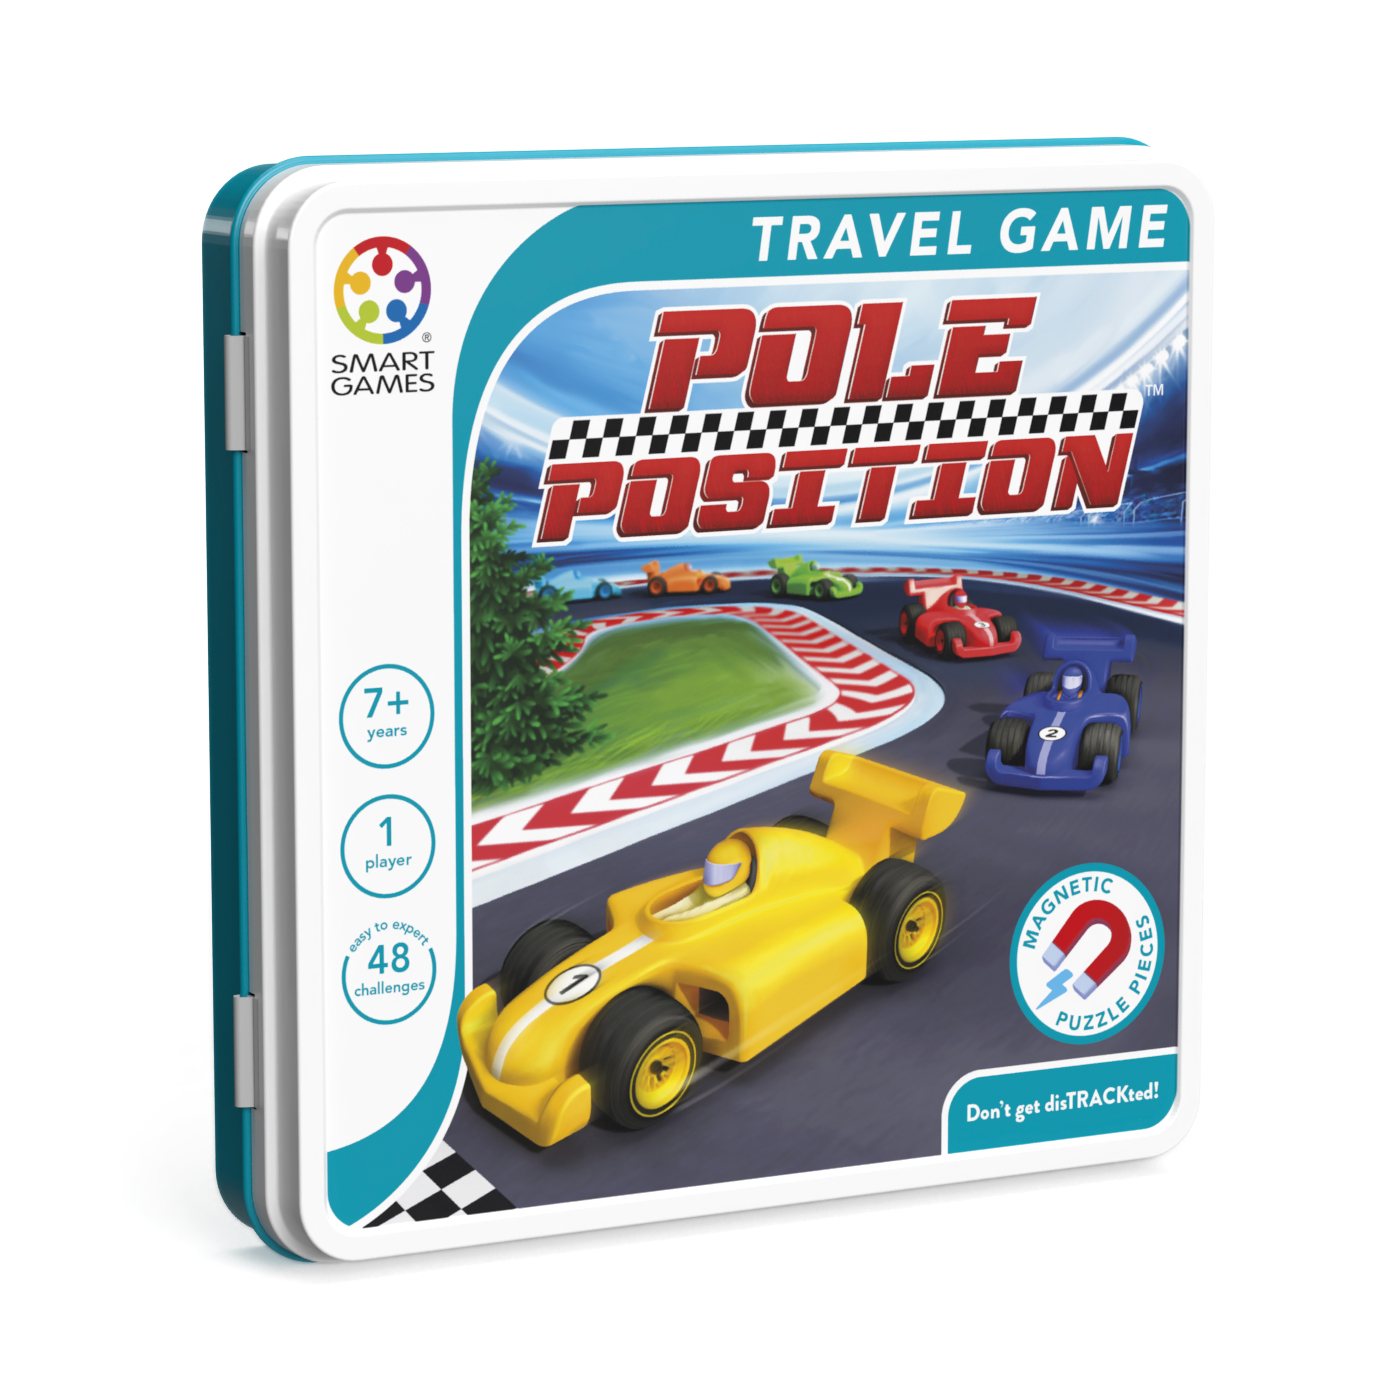 pole position travel game